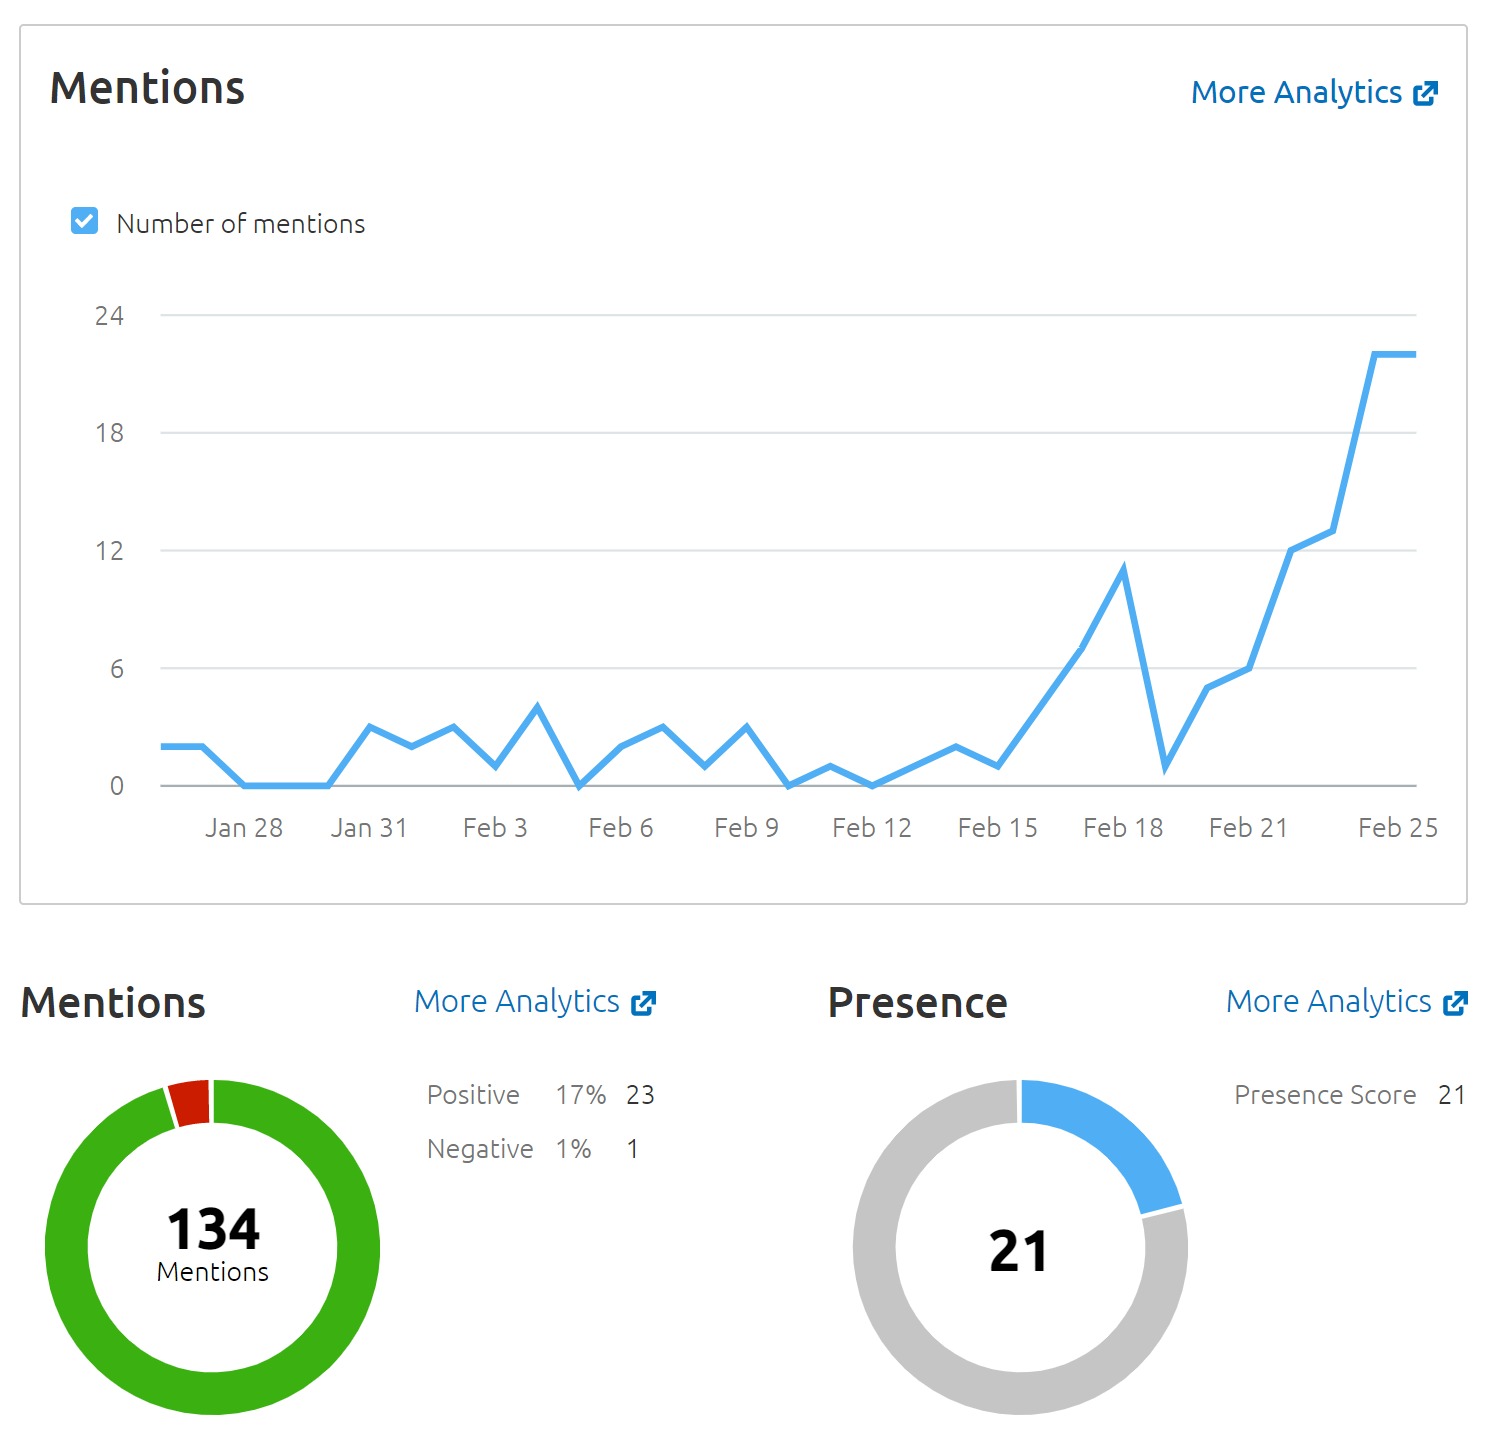 brand mentions report shows a line graph over time and pie charts showing sentiment and presence score